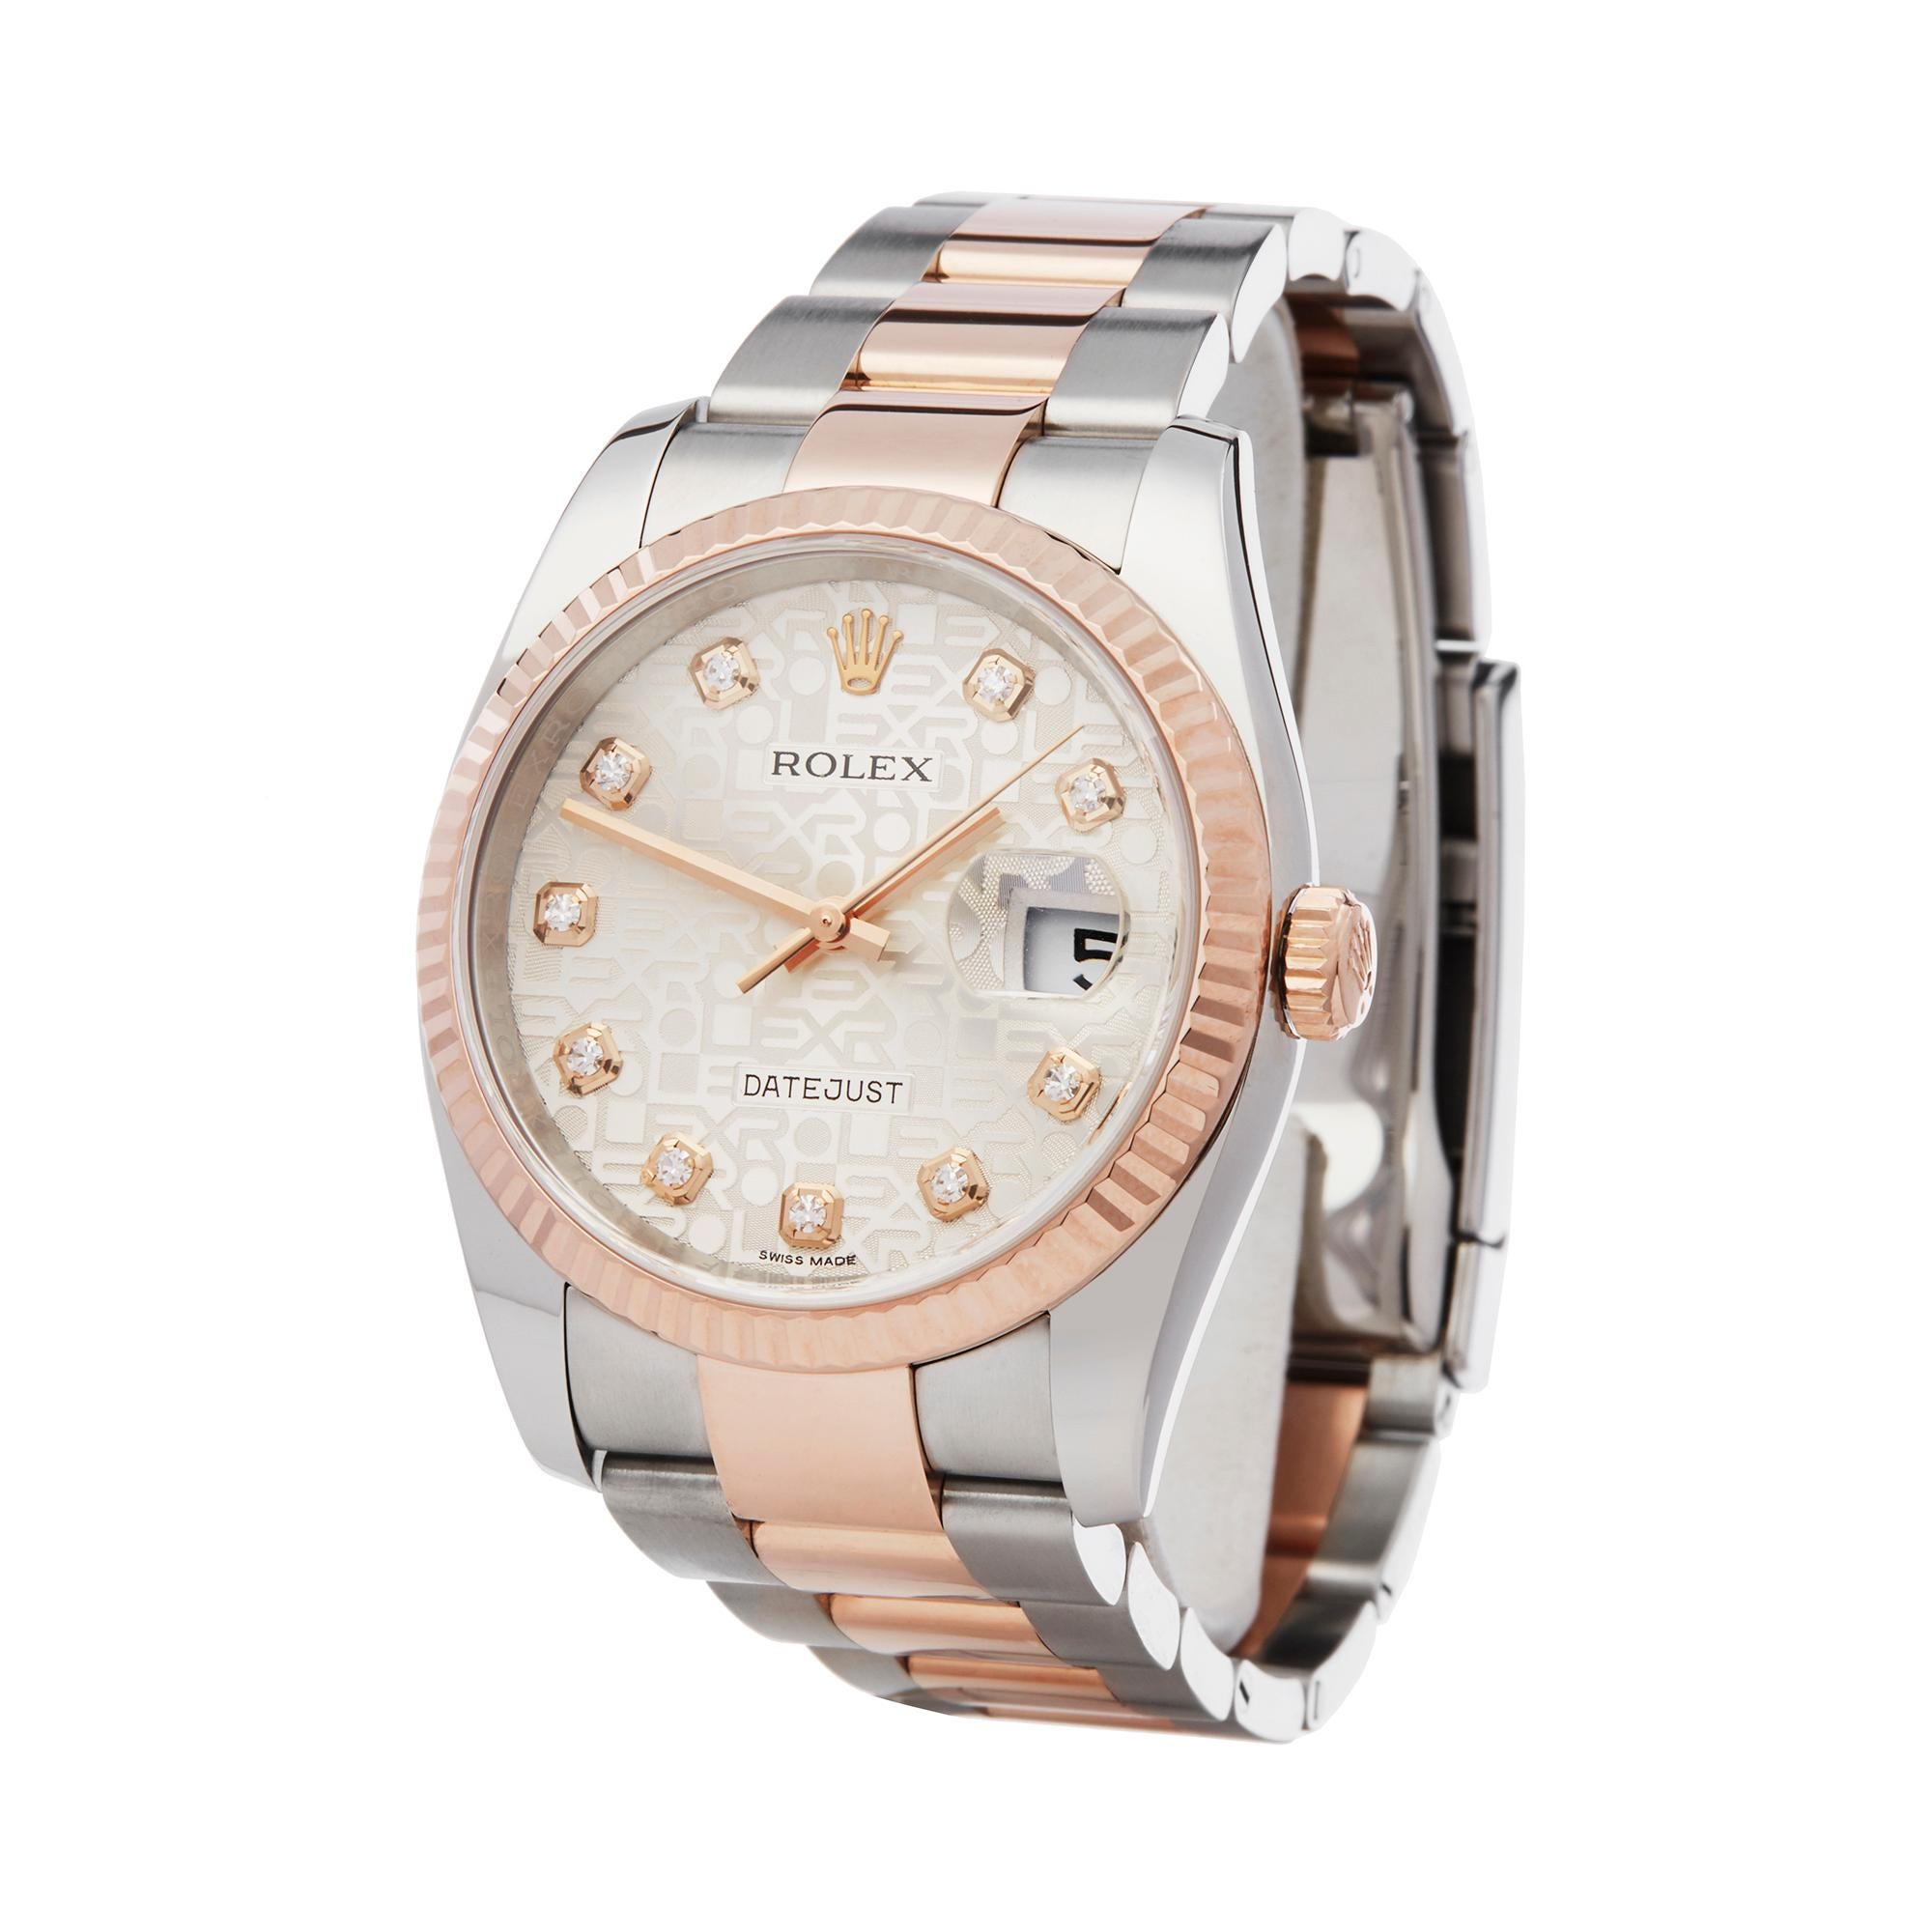 Reference: W6115
Manufacturer: Rolex
Model: Datejust
Model Reference: 116231
Age: 15th August 2017
Gender: Men's
Box and Papers: Box, Manuals and Guarantee
Dial: Silver Diamond
Glass: Sapphire Crystal
Movement: Automatic
Water Resistance: To